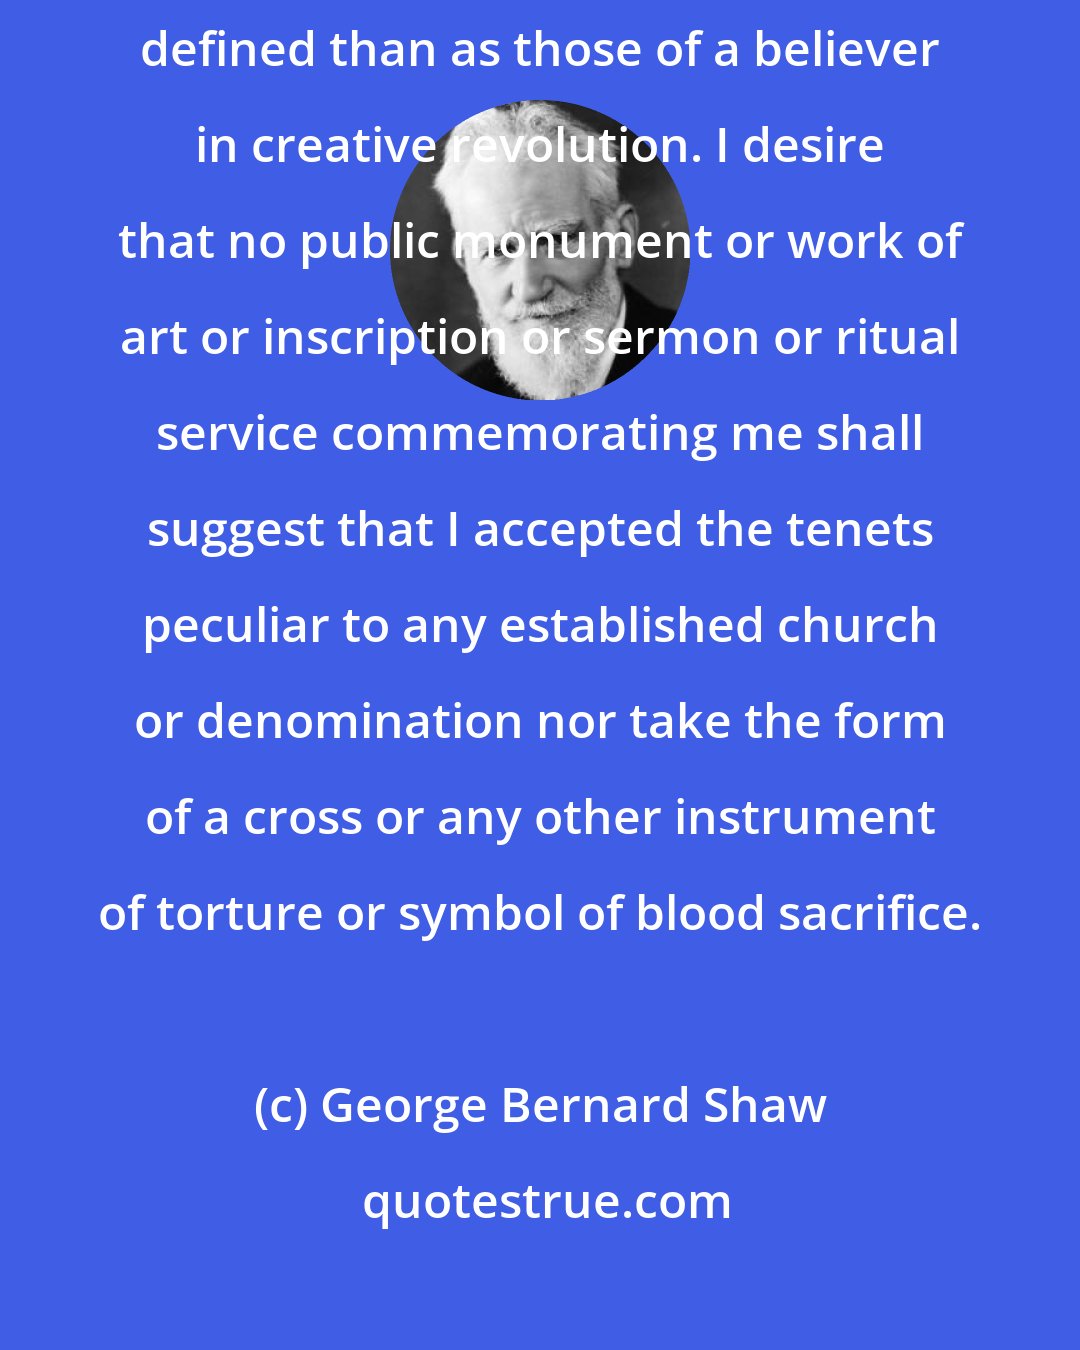 George Bernard Shaw: My religious convictions and scientific views cannot at present be more specifically defined than as those of a believer in creative revolution. I desire that no public monument or work of art or inscription or sermon or ritual service commemorating me shall suggest that I accepted the tenets peculiar to any established church or denomination nor take the form of a cross or any other instrument of torture or symbol of blood sacrifice.